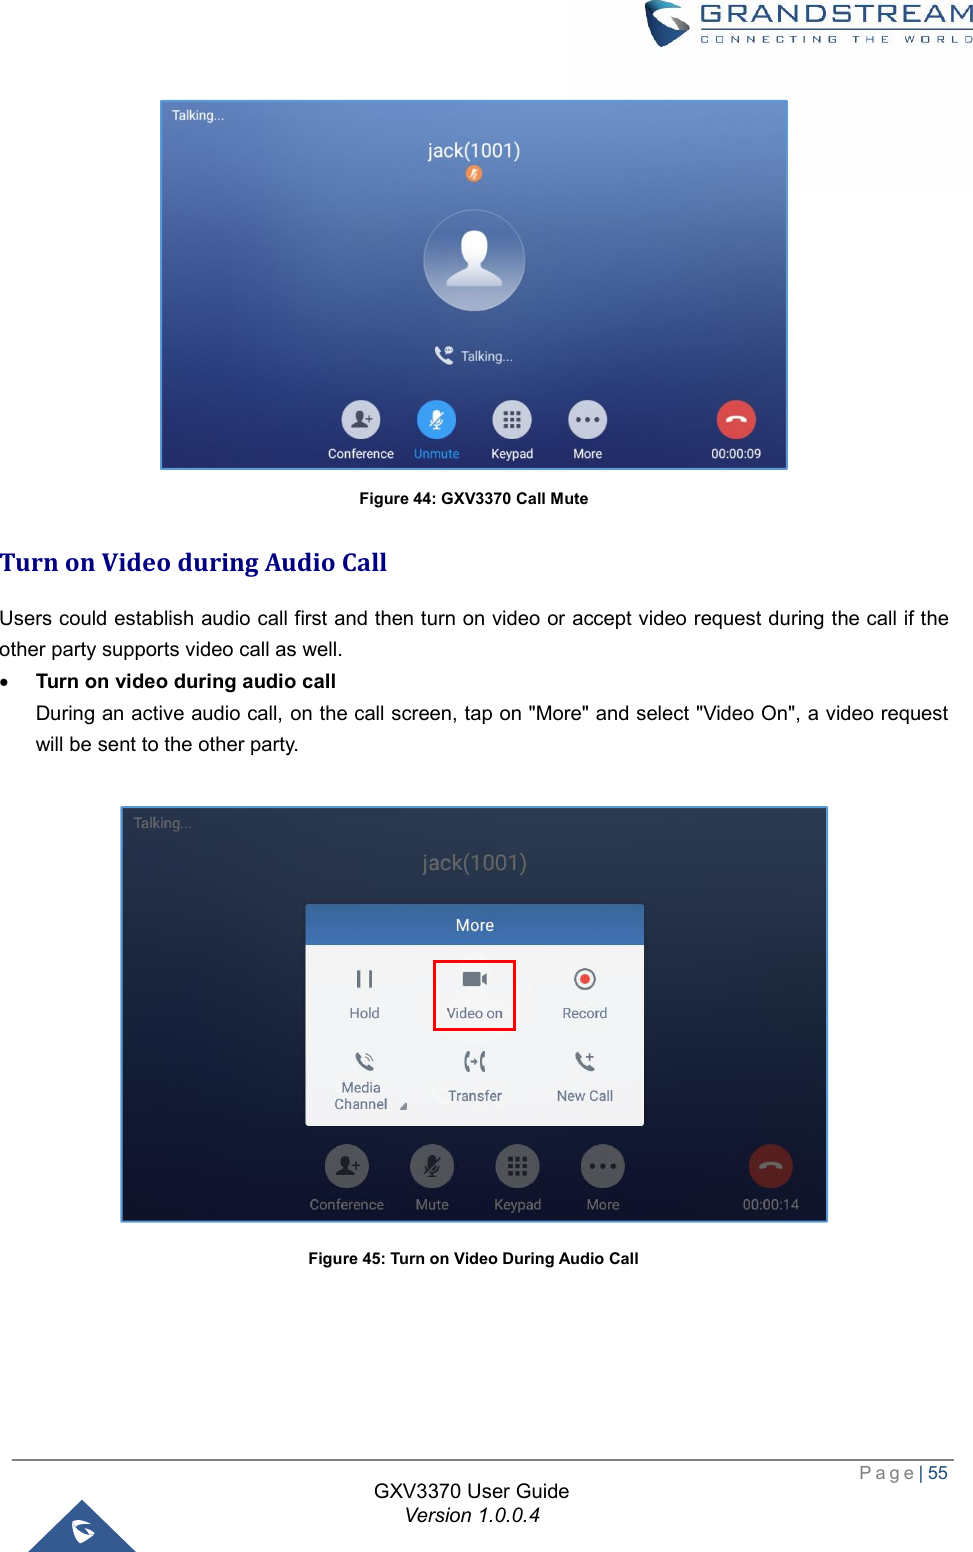  Page| 55  GXV3370 User Guide Version 1.0.0.4   Figure 44: GXV3370 Call Mute Turn on Video during Audio Call Users could establish audio call first and then turn on video or accept video request during the call if the other party supports video call as well. · Turn on video during audio call During an active audio call, on the call screen, tap on &quot;More&quot; and select &quot;Video On&quot;, a video request will be sent to the other party.   Figure 45: Turn on Video During Audio Call     